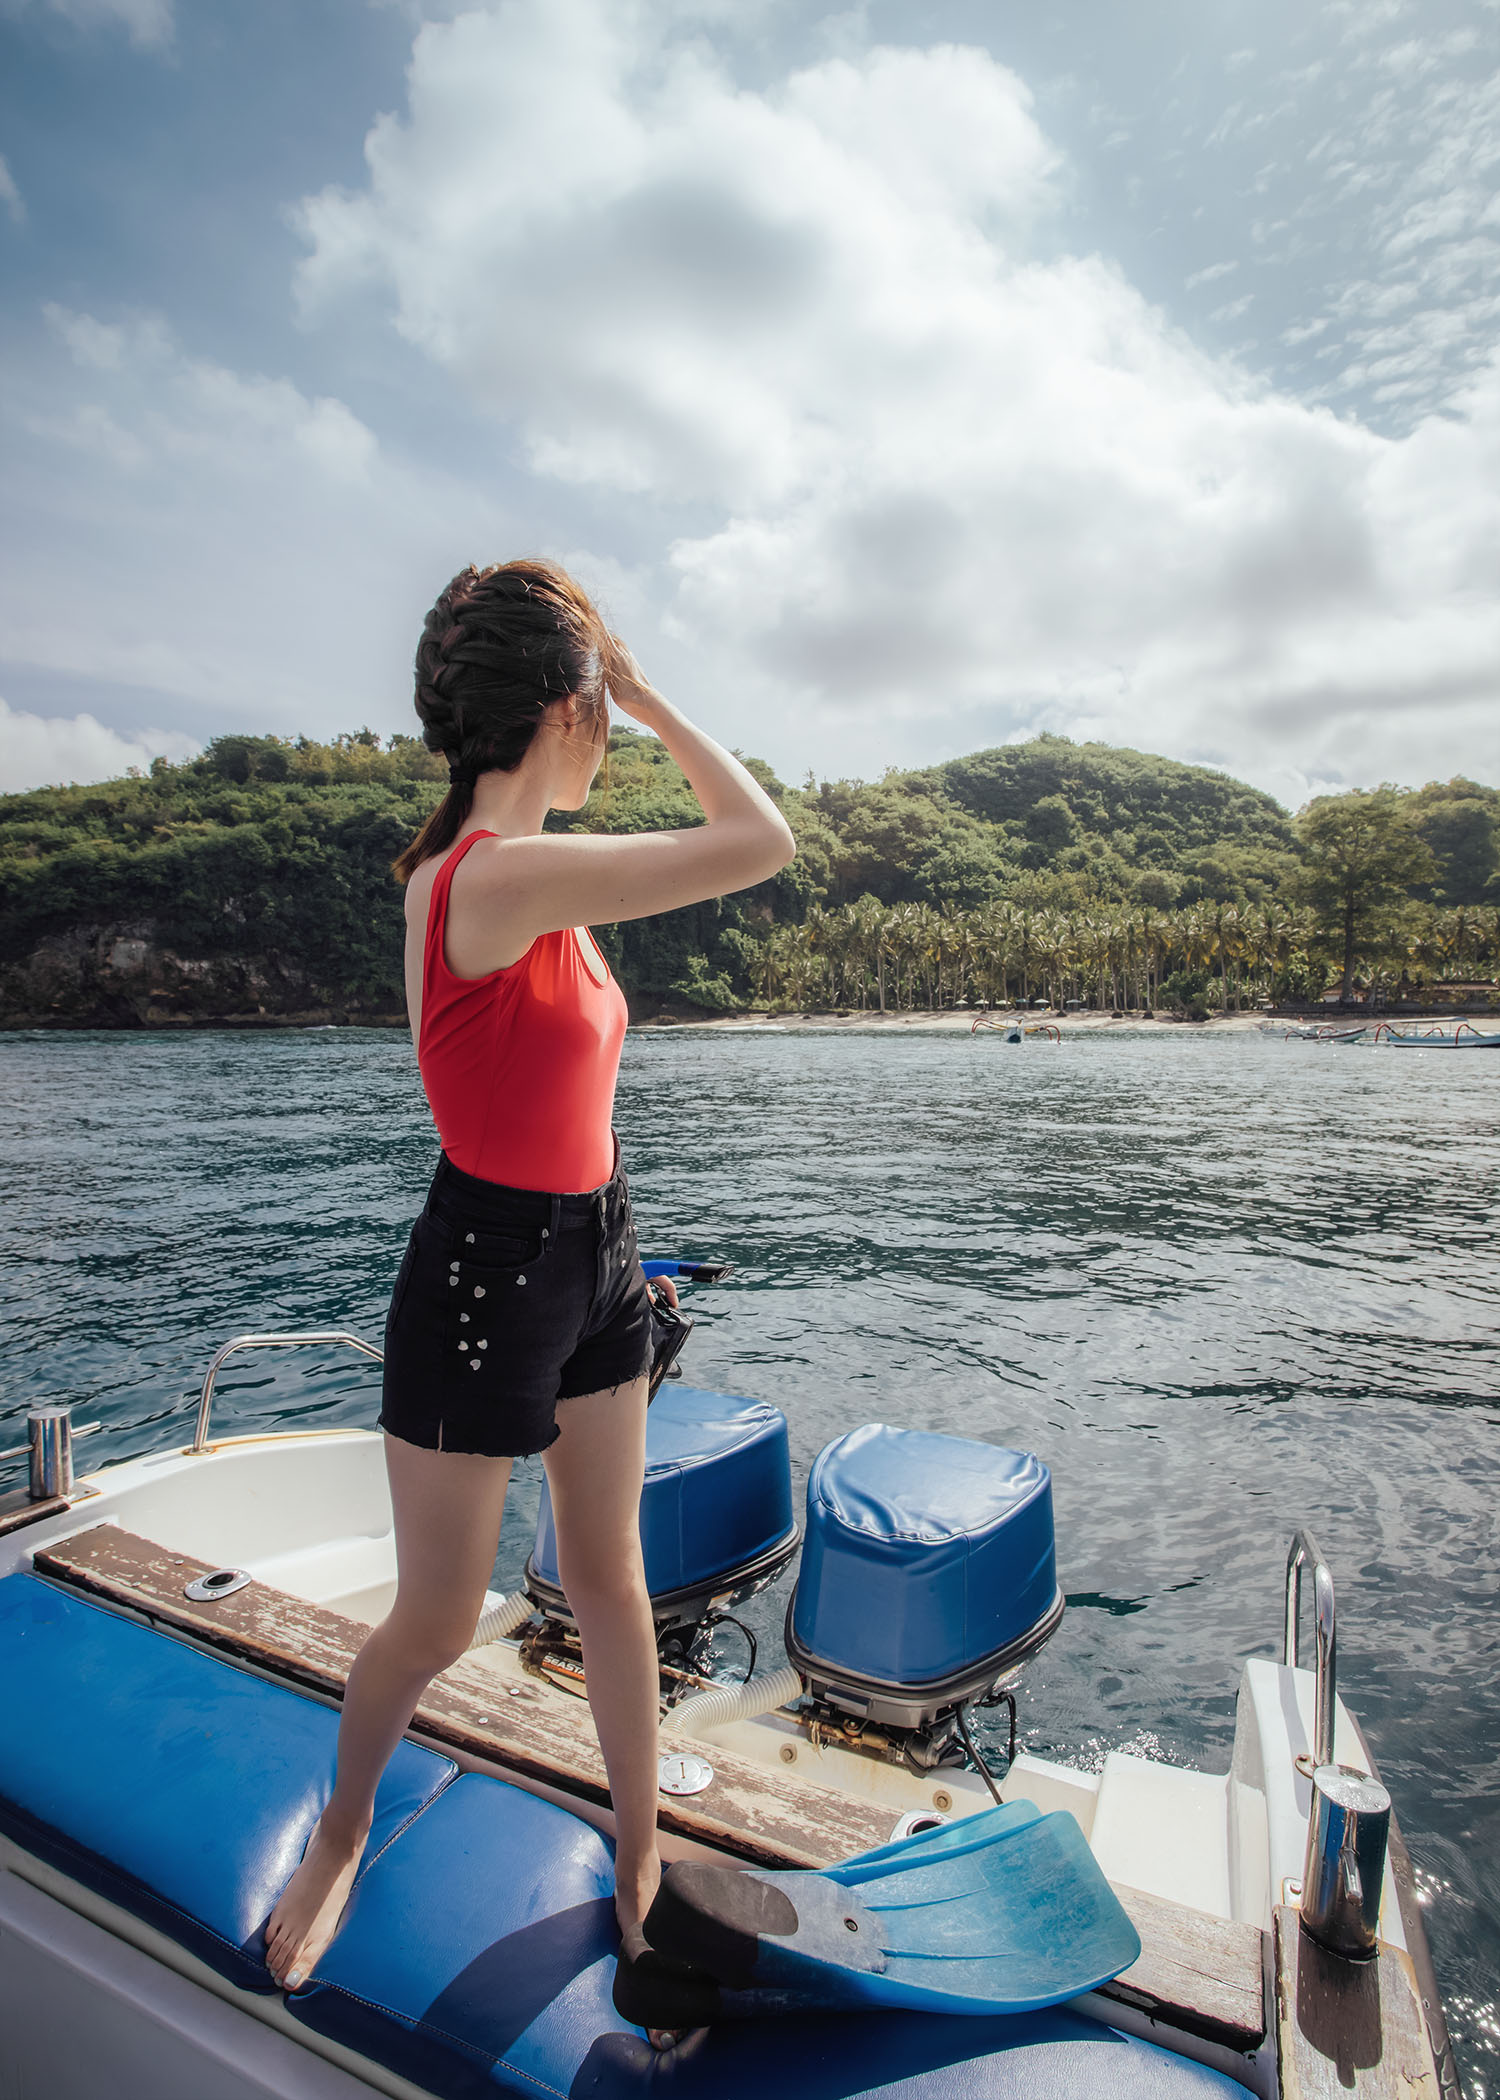 Fashion and travel blogger influencer Jenny Tsang of Tsangtastic traveling in Bali, Indonesia, wearing COVER Tank Swimsuit, PAIGE Heart Shorts, while snorkeling.